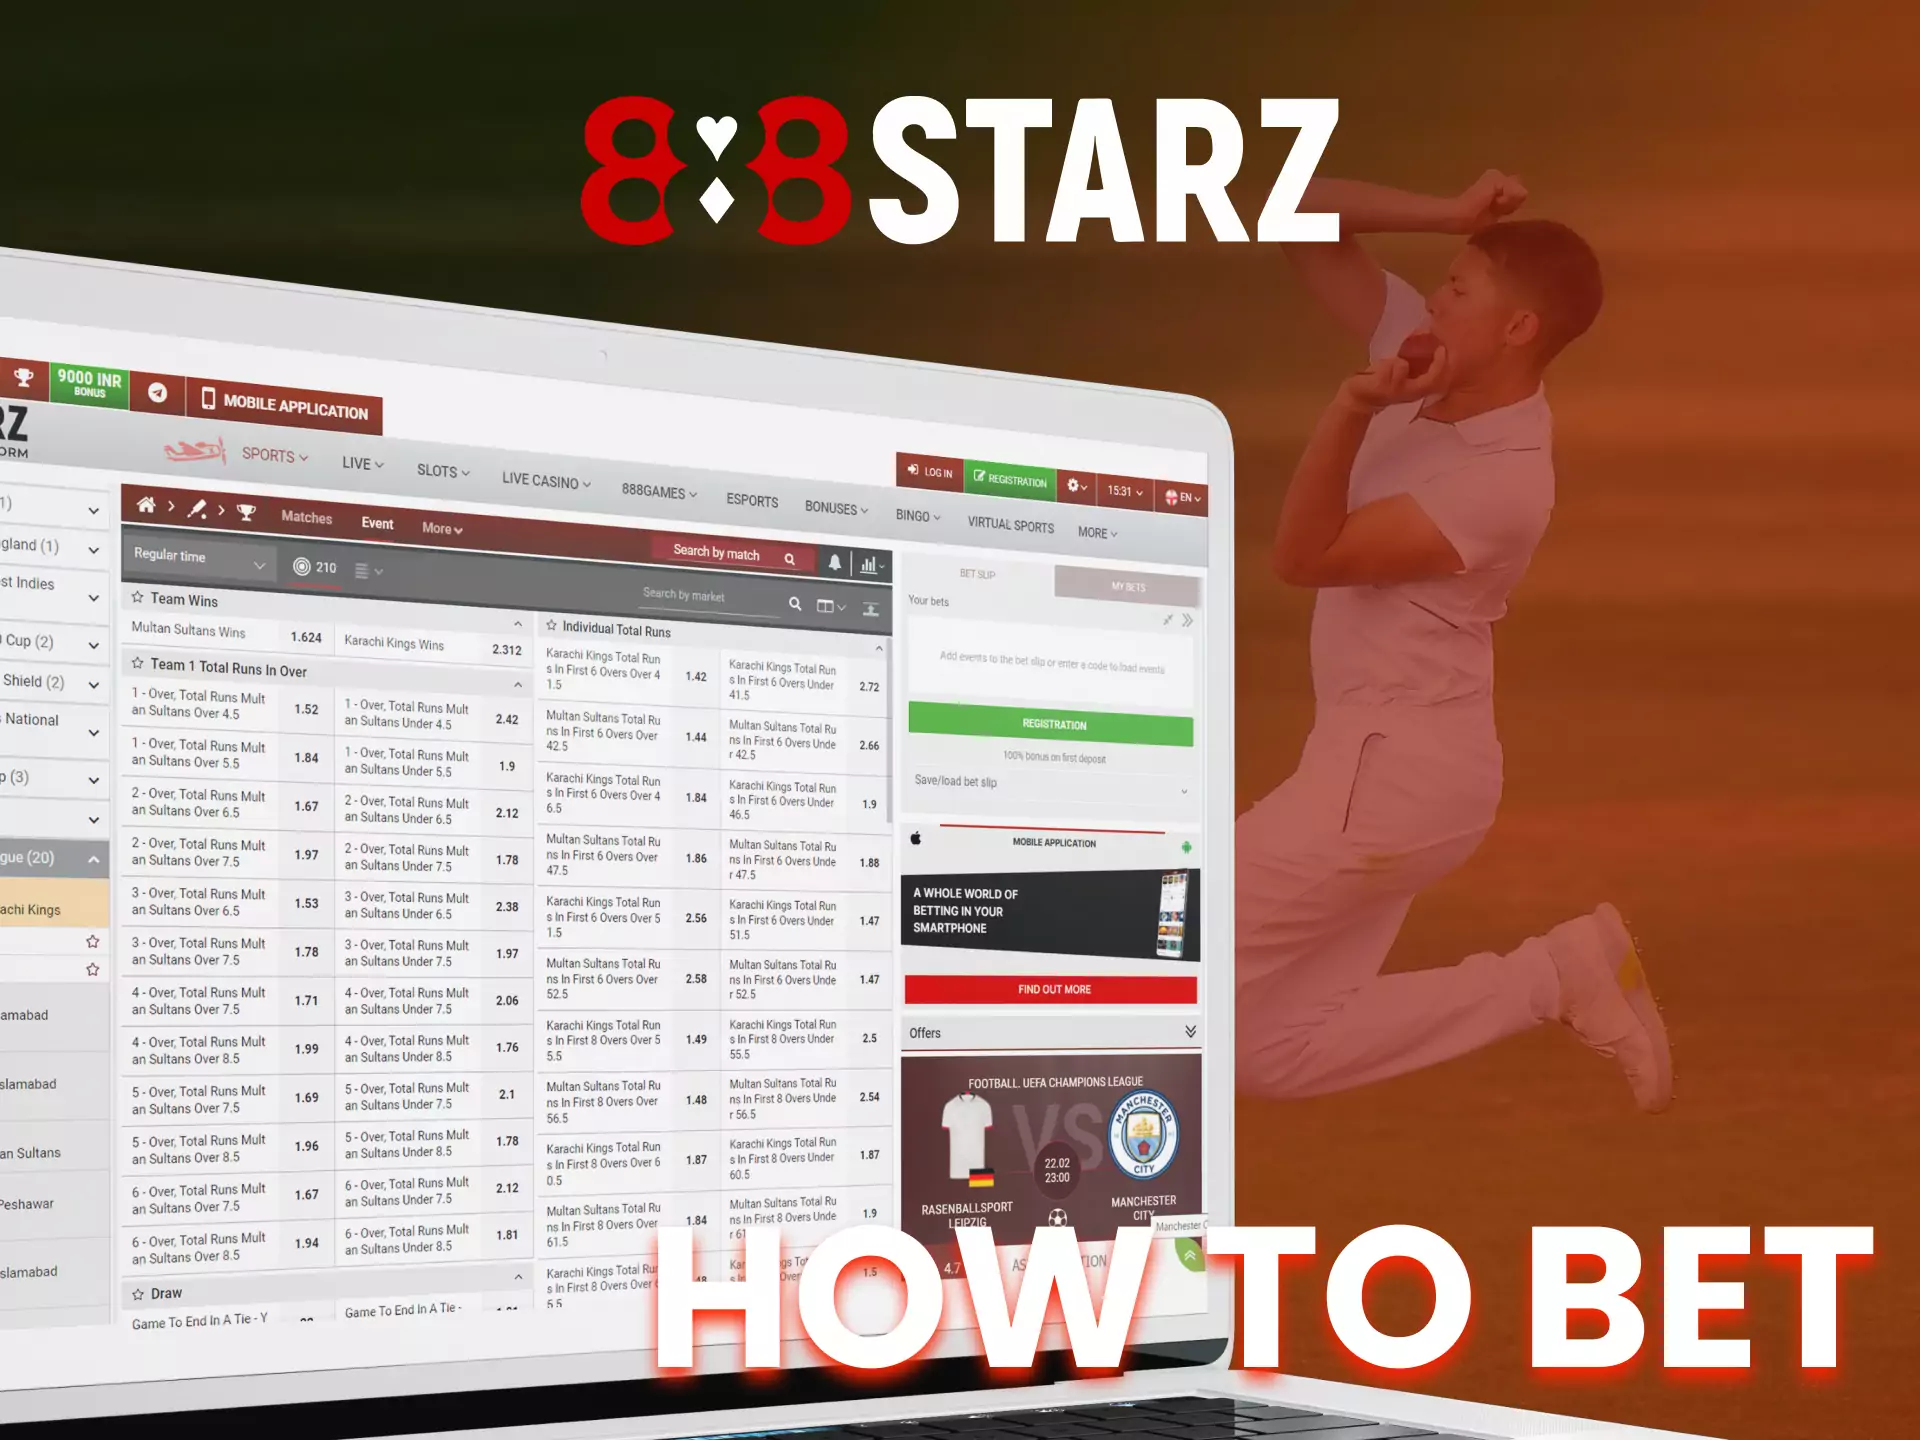 Place bet at 888starz without problems.